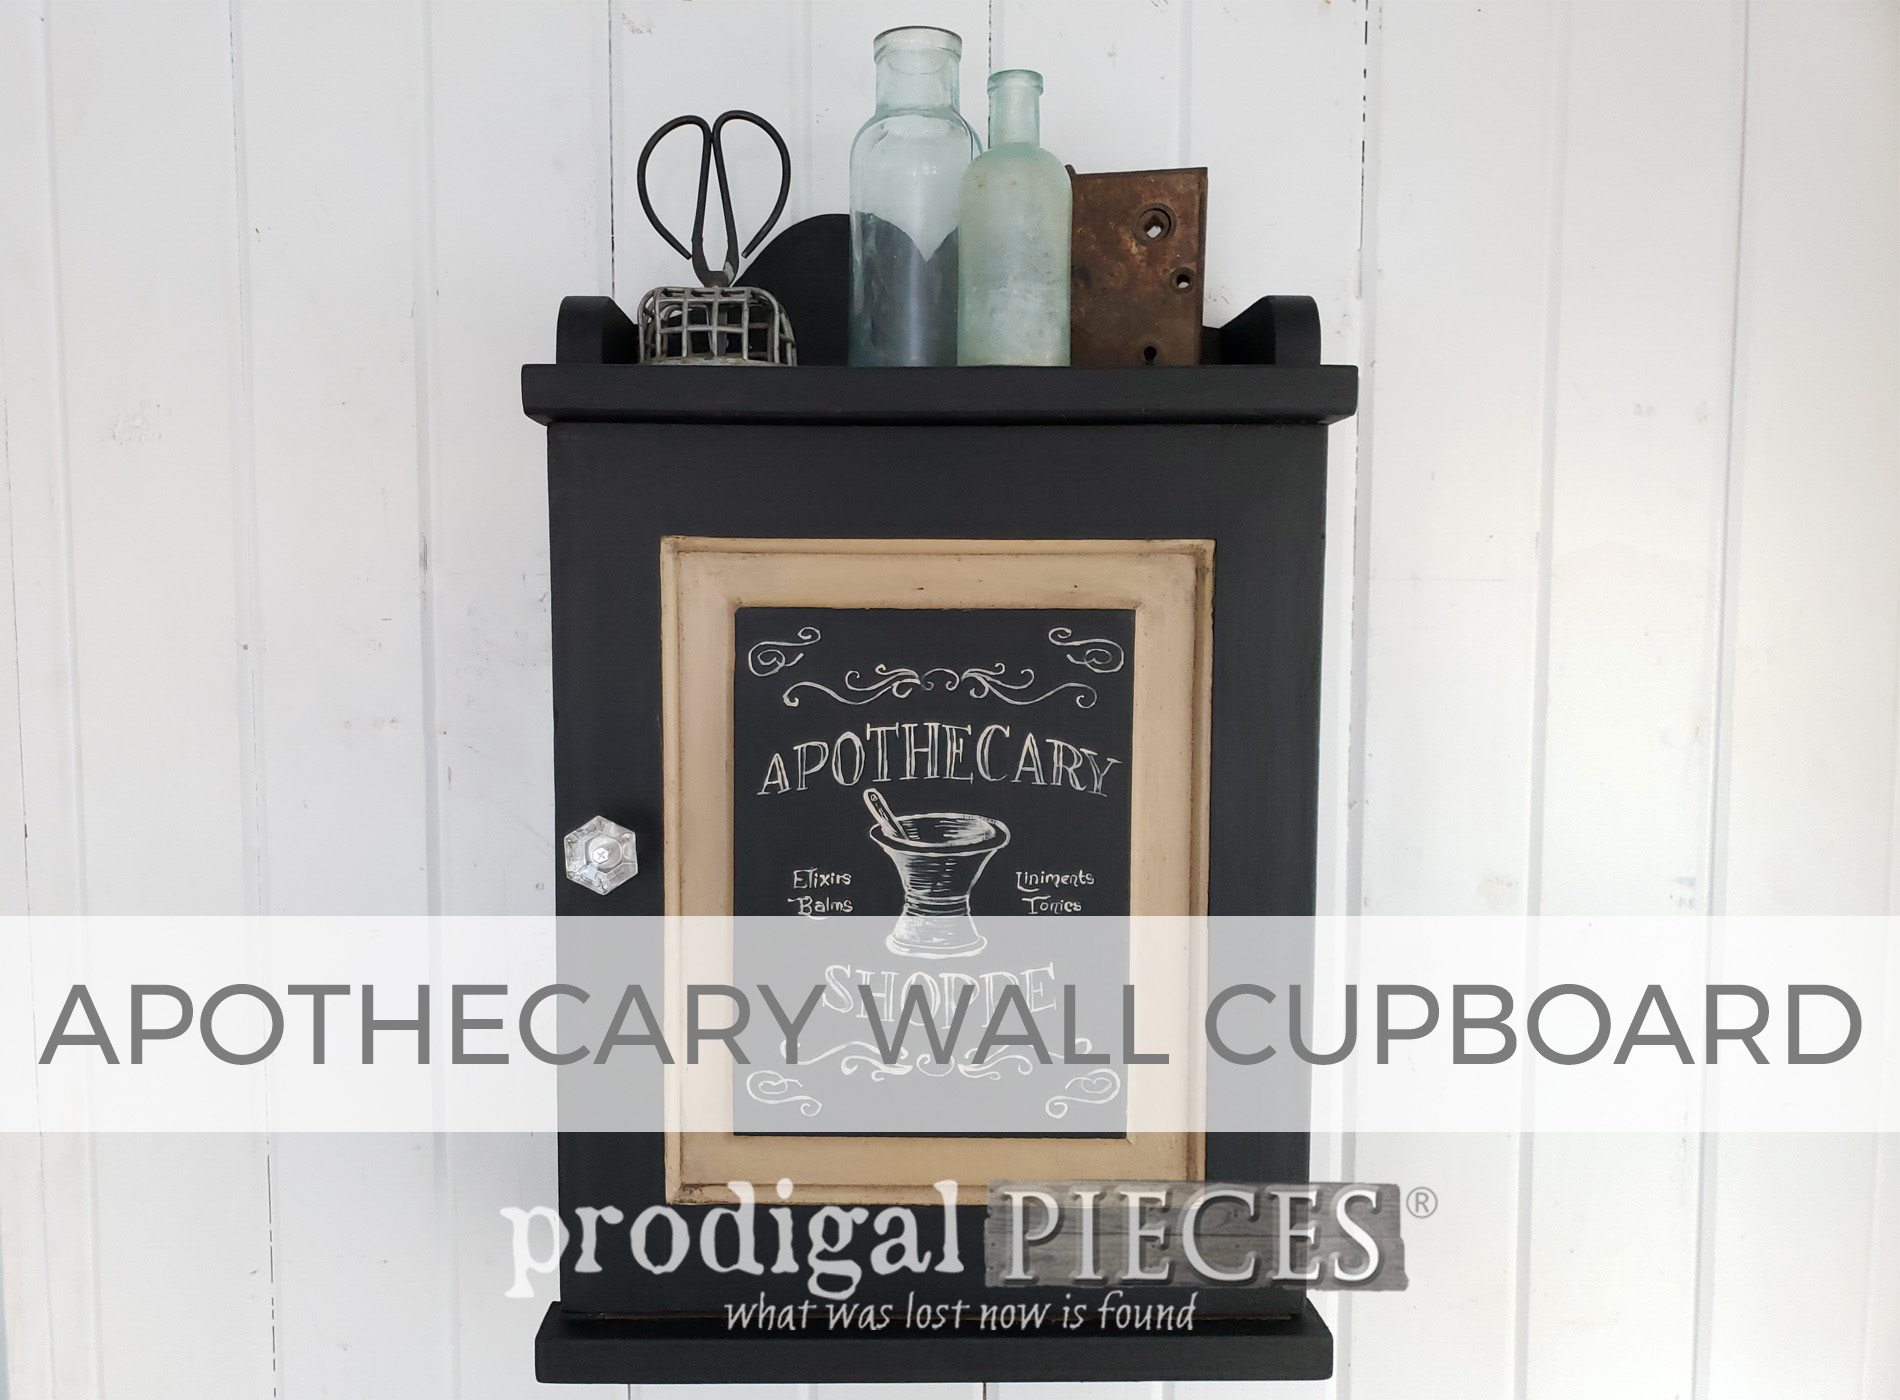 Apothecary Wall Cupboard by Larissa of Prodigal Pieces | prodigalpieces.com